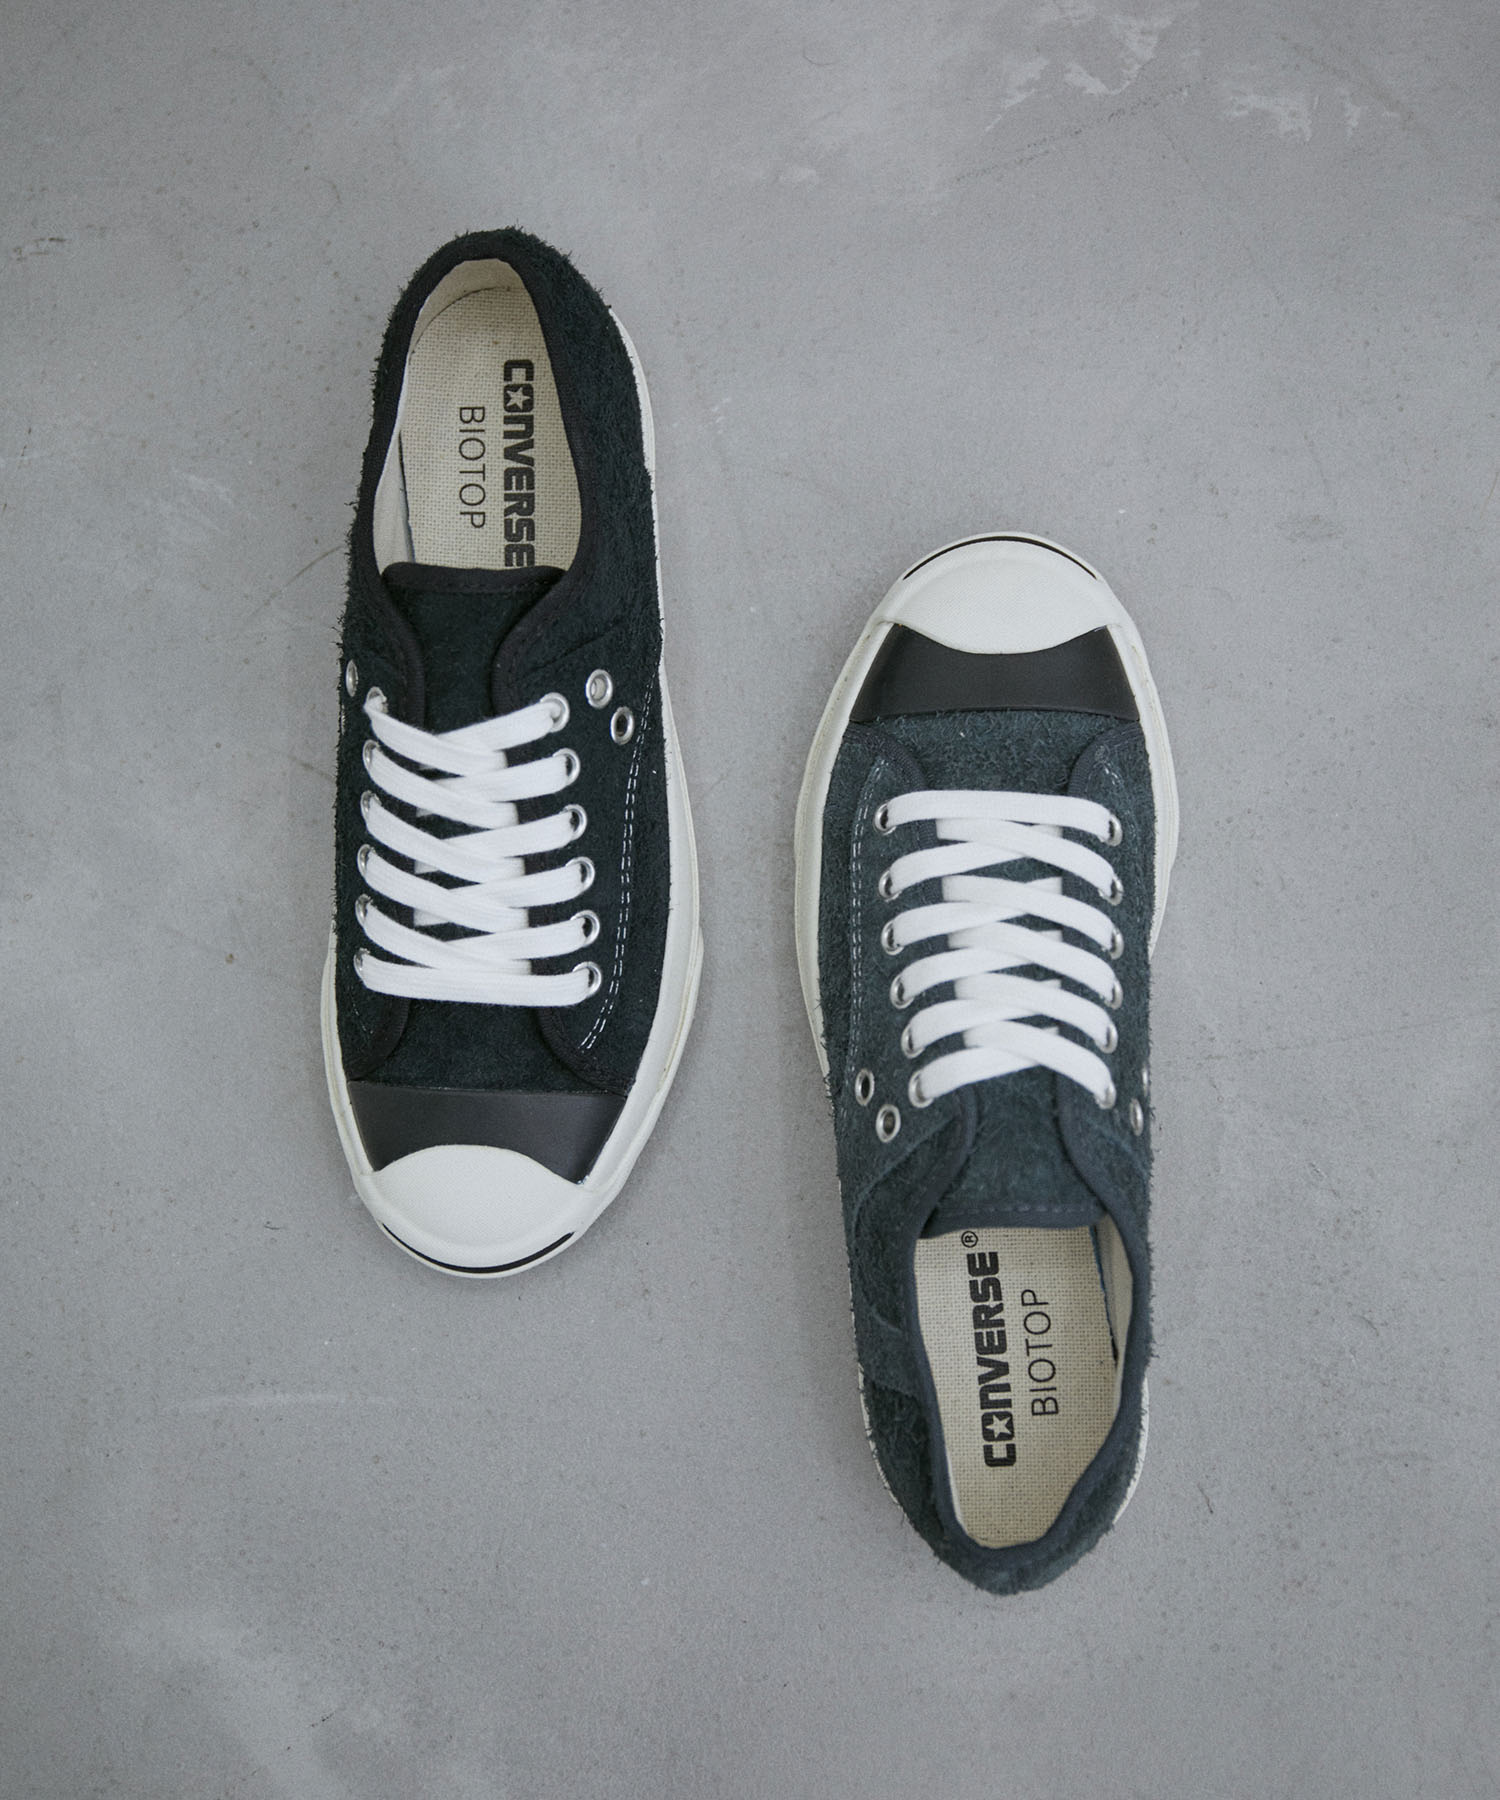 CONVERSE for BIOTOP】JACK PURCELL RET SUEDE RLY / BT|ADAM ET ROPE